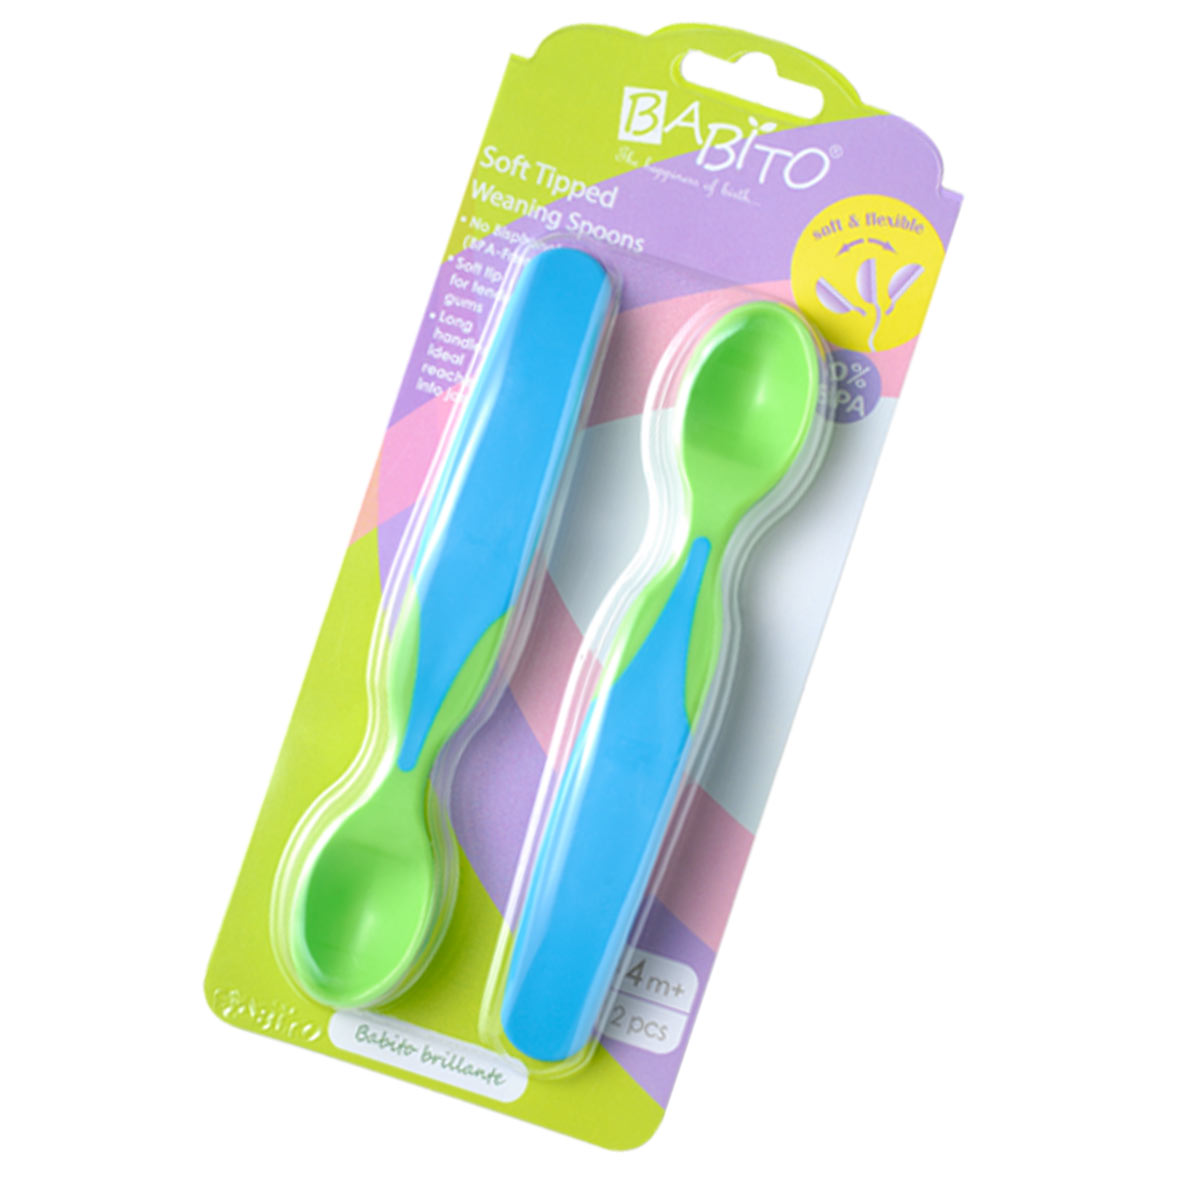 BABITO : Soft Tipped Weaning Spoon, 2Pcs. / Green(LS21P4012) 